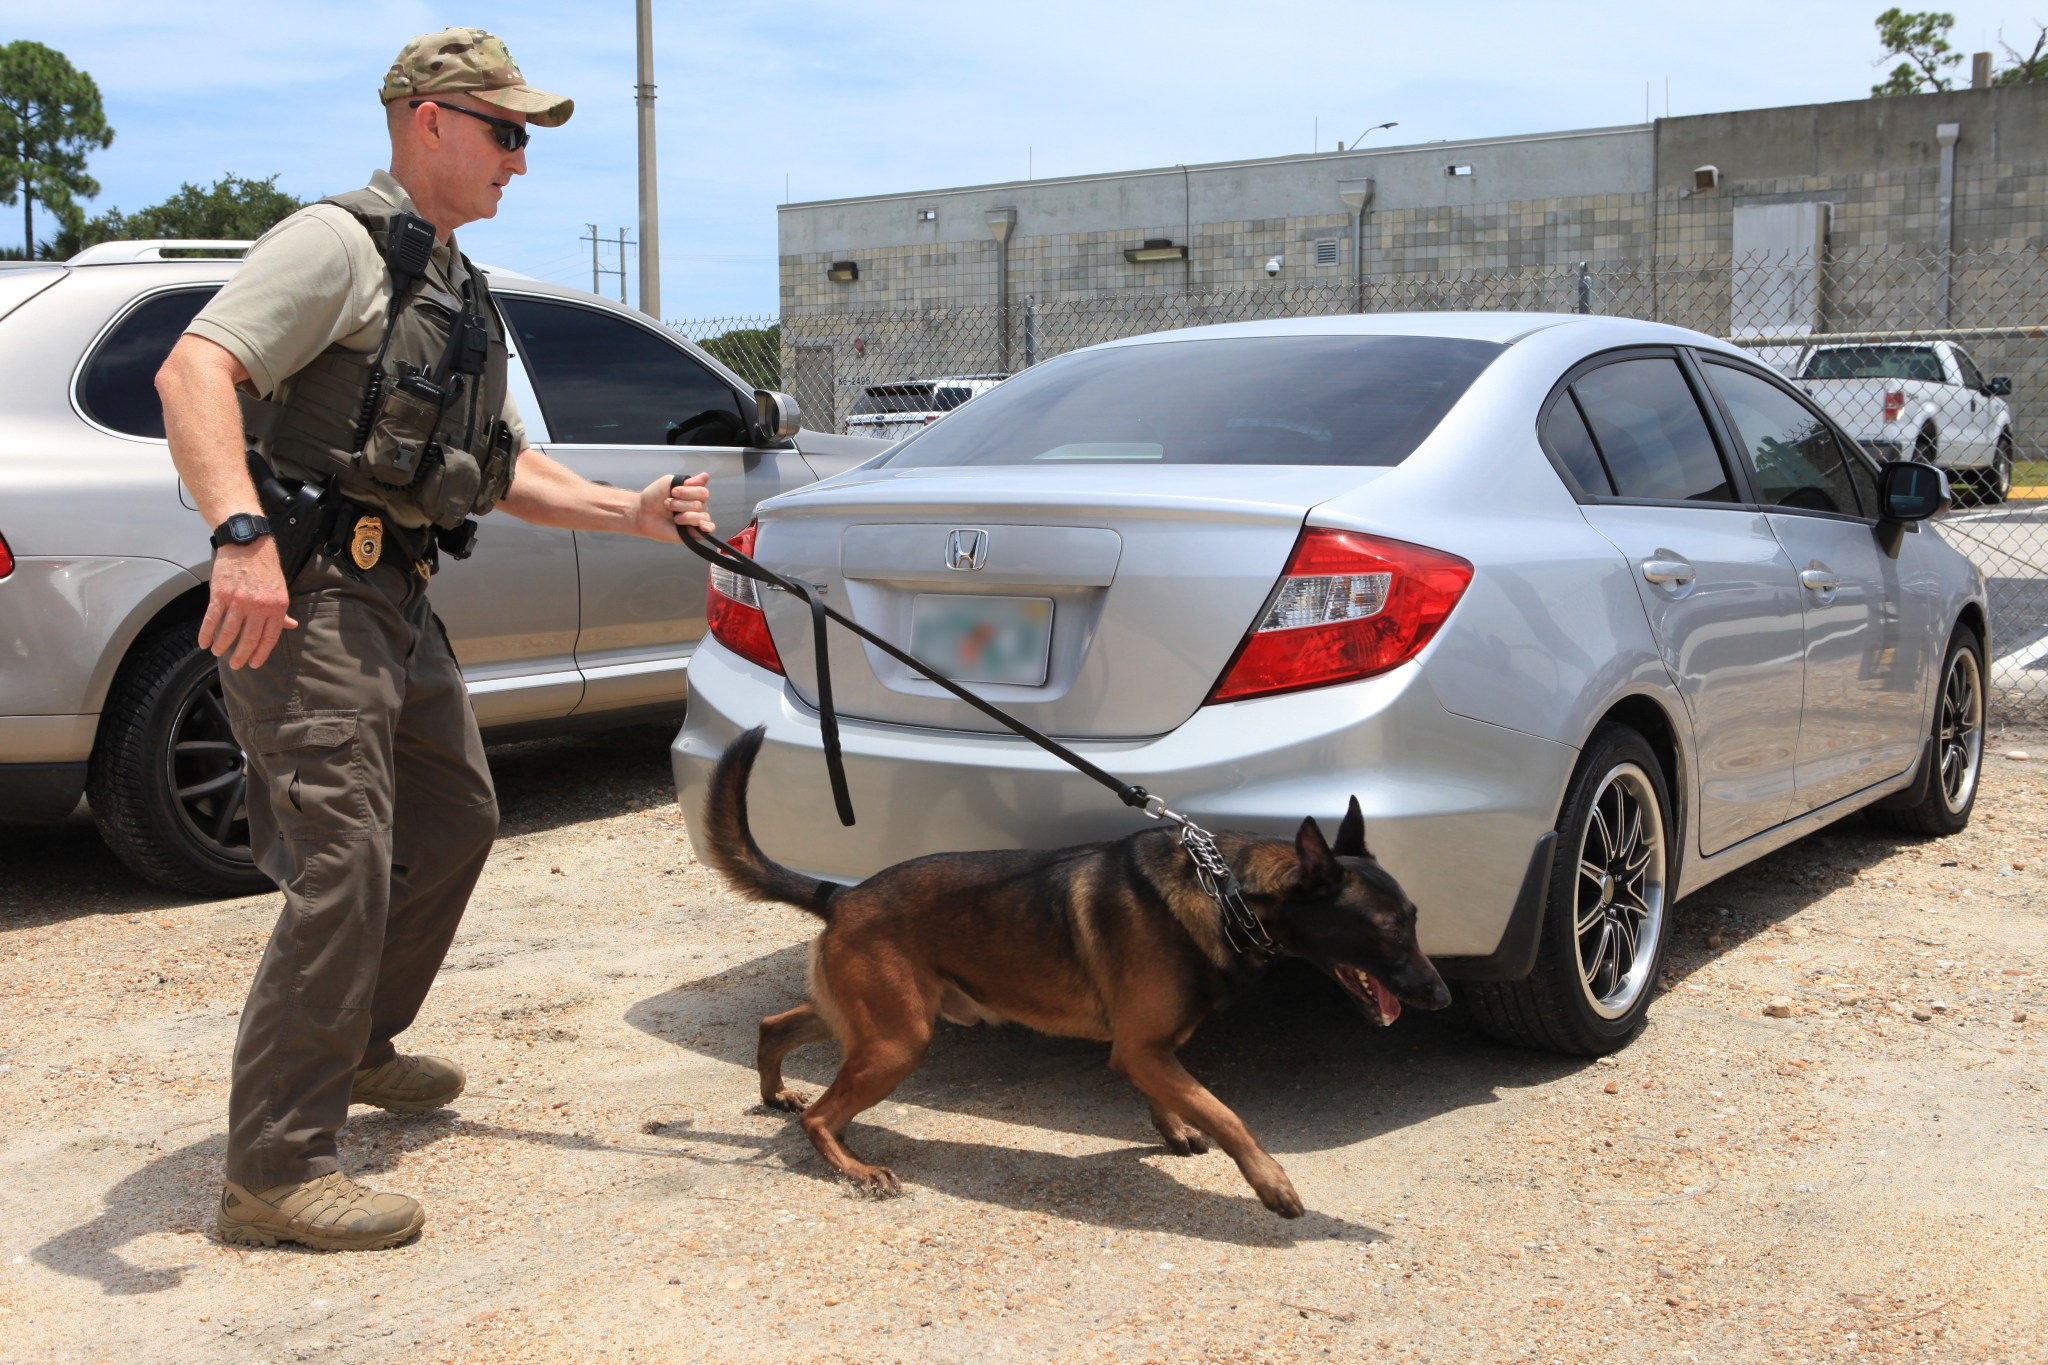 During training, K-9 Officer John McGee leads K-9 Spike through a detection exercise at the Law Enforcement Academy.